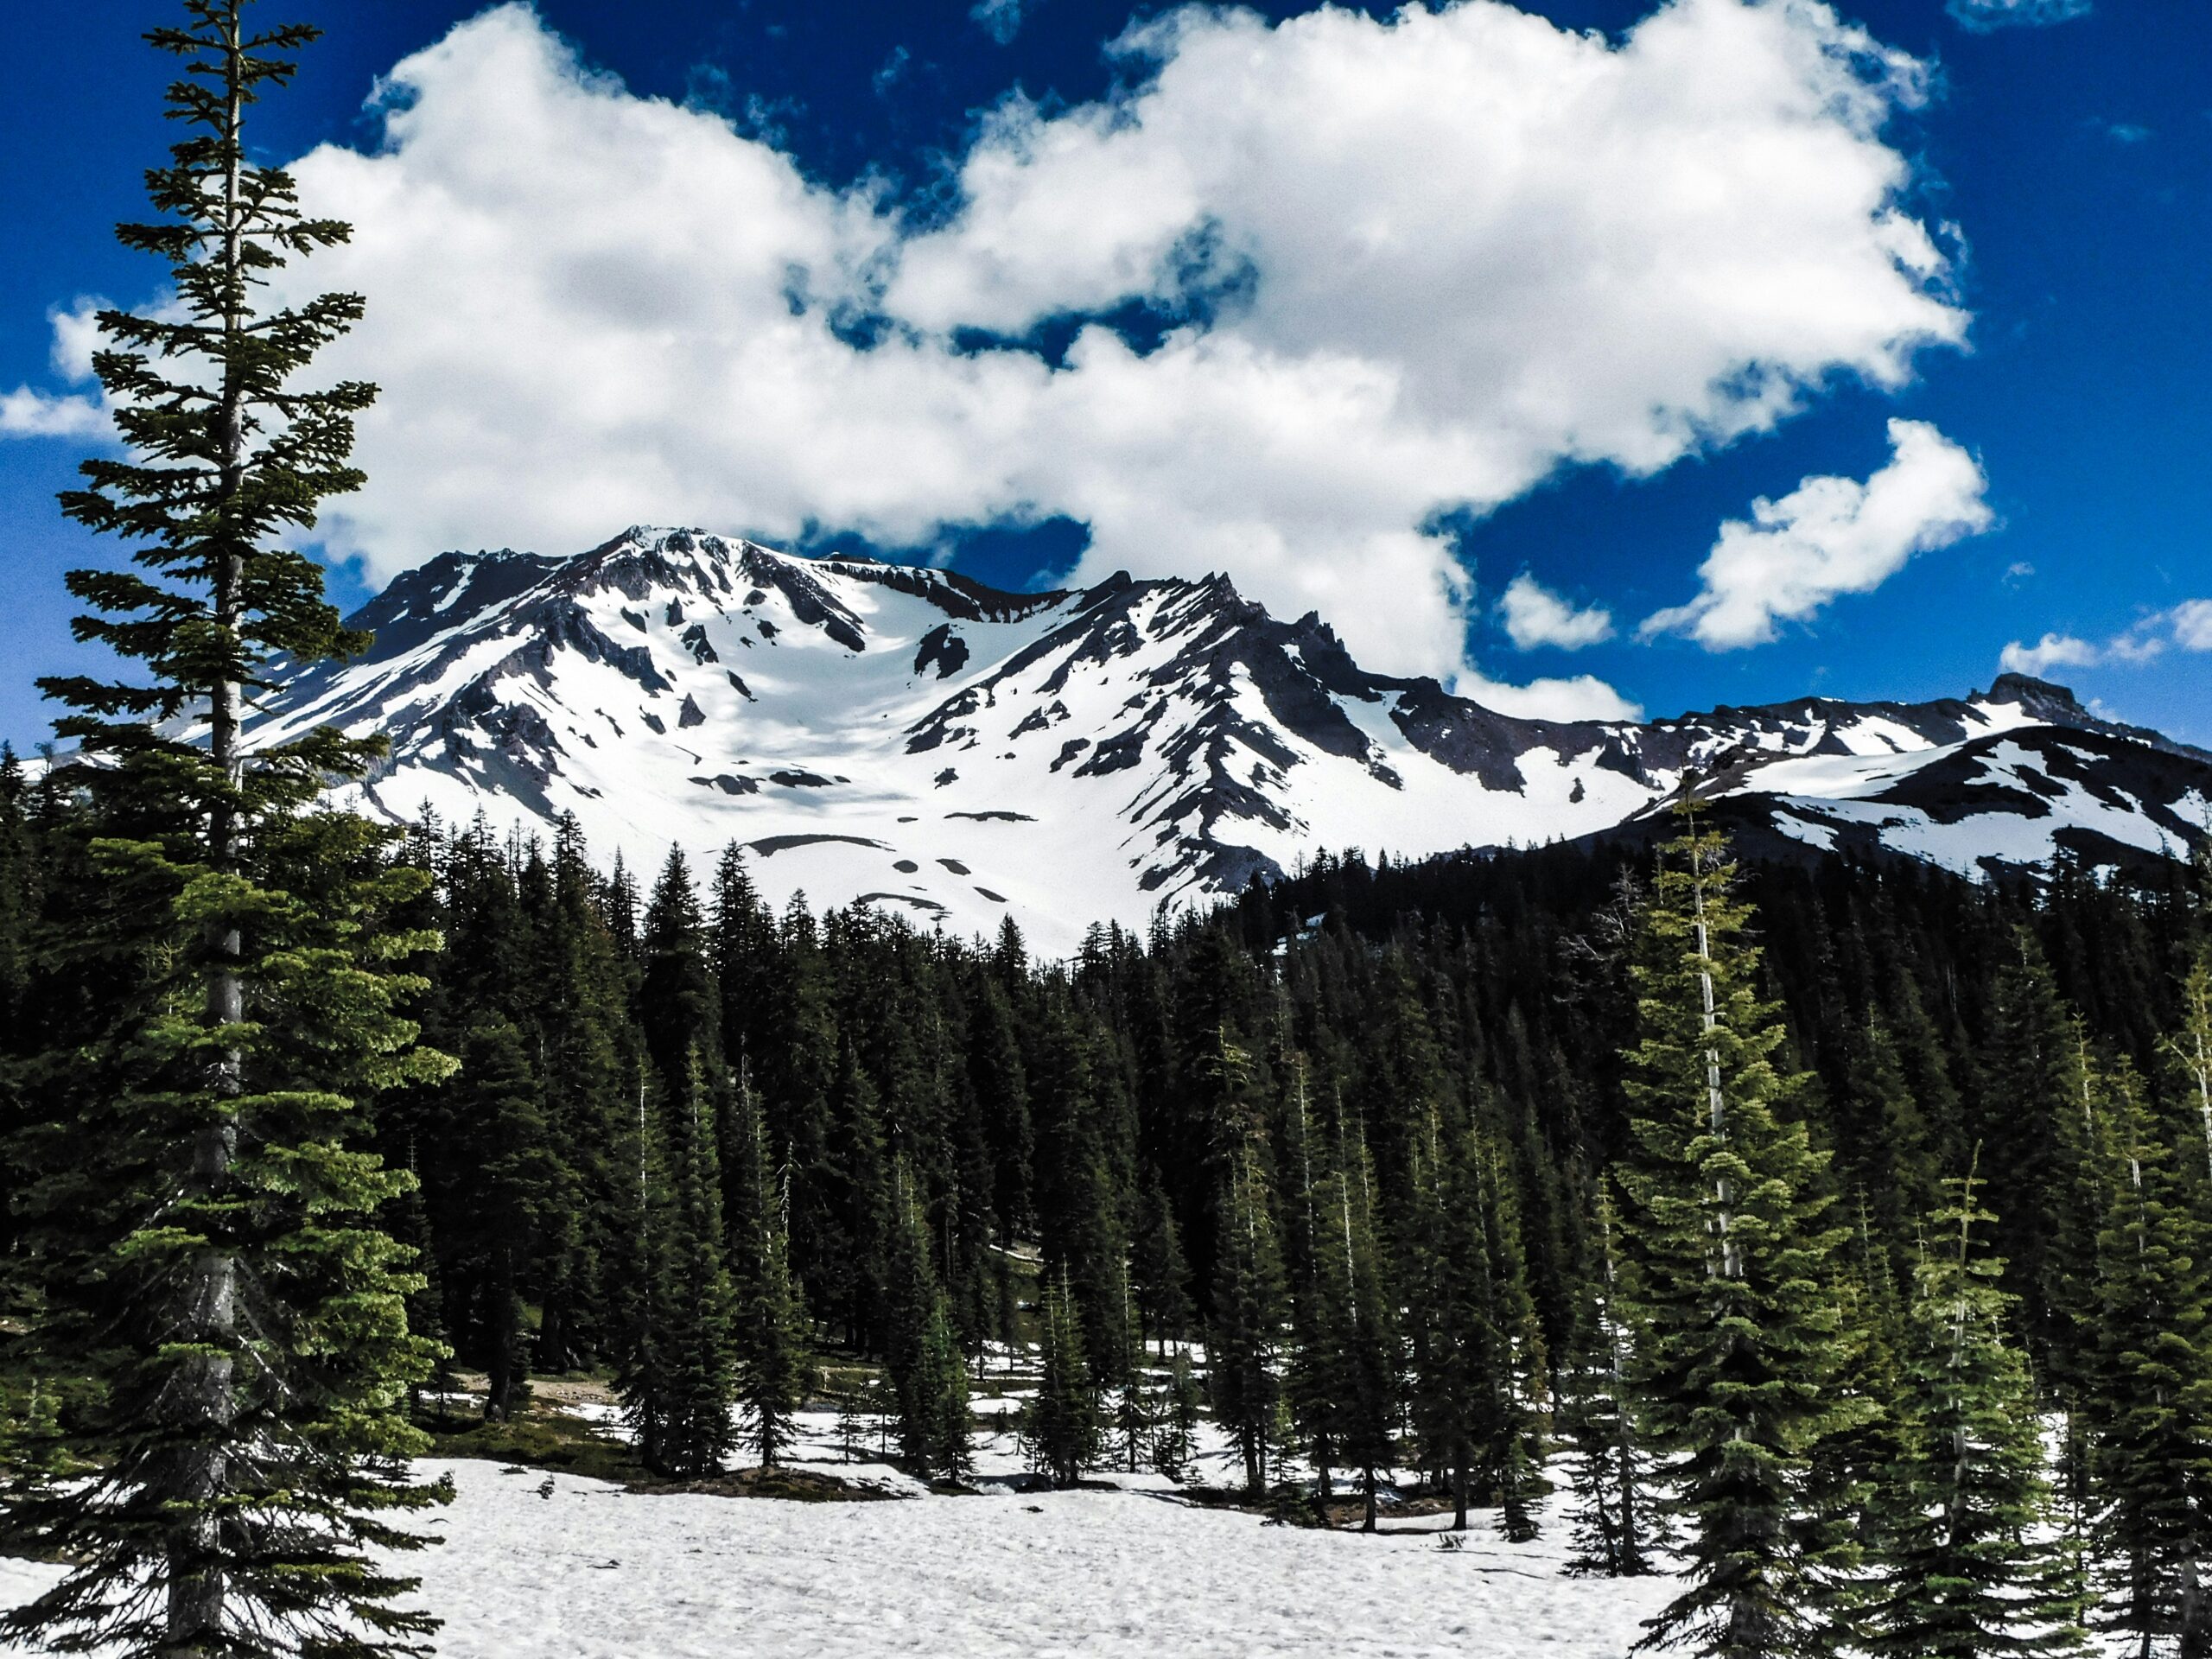 What Are The Nearby Attractions To The Camping Facilities Near Mount Shasta?